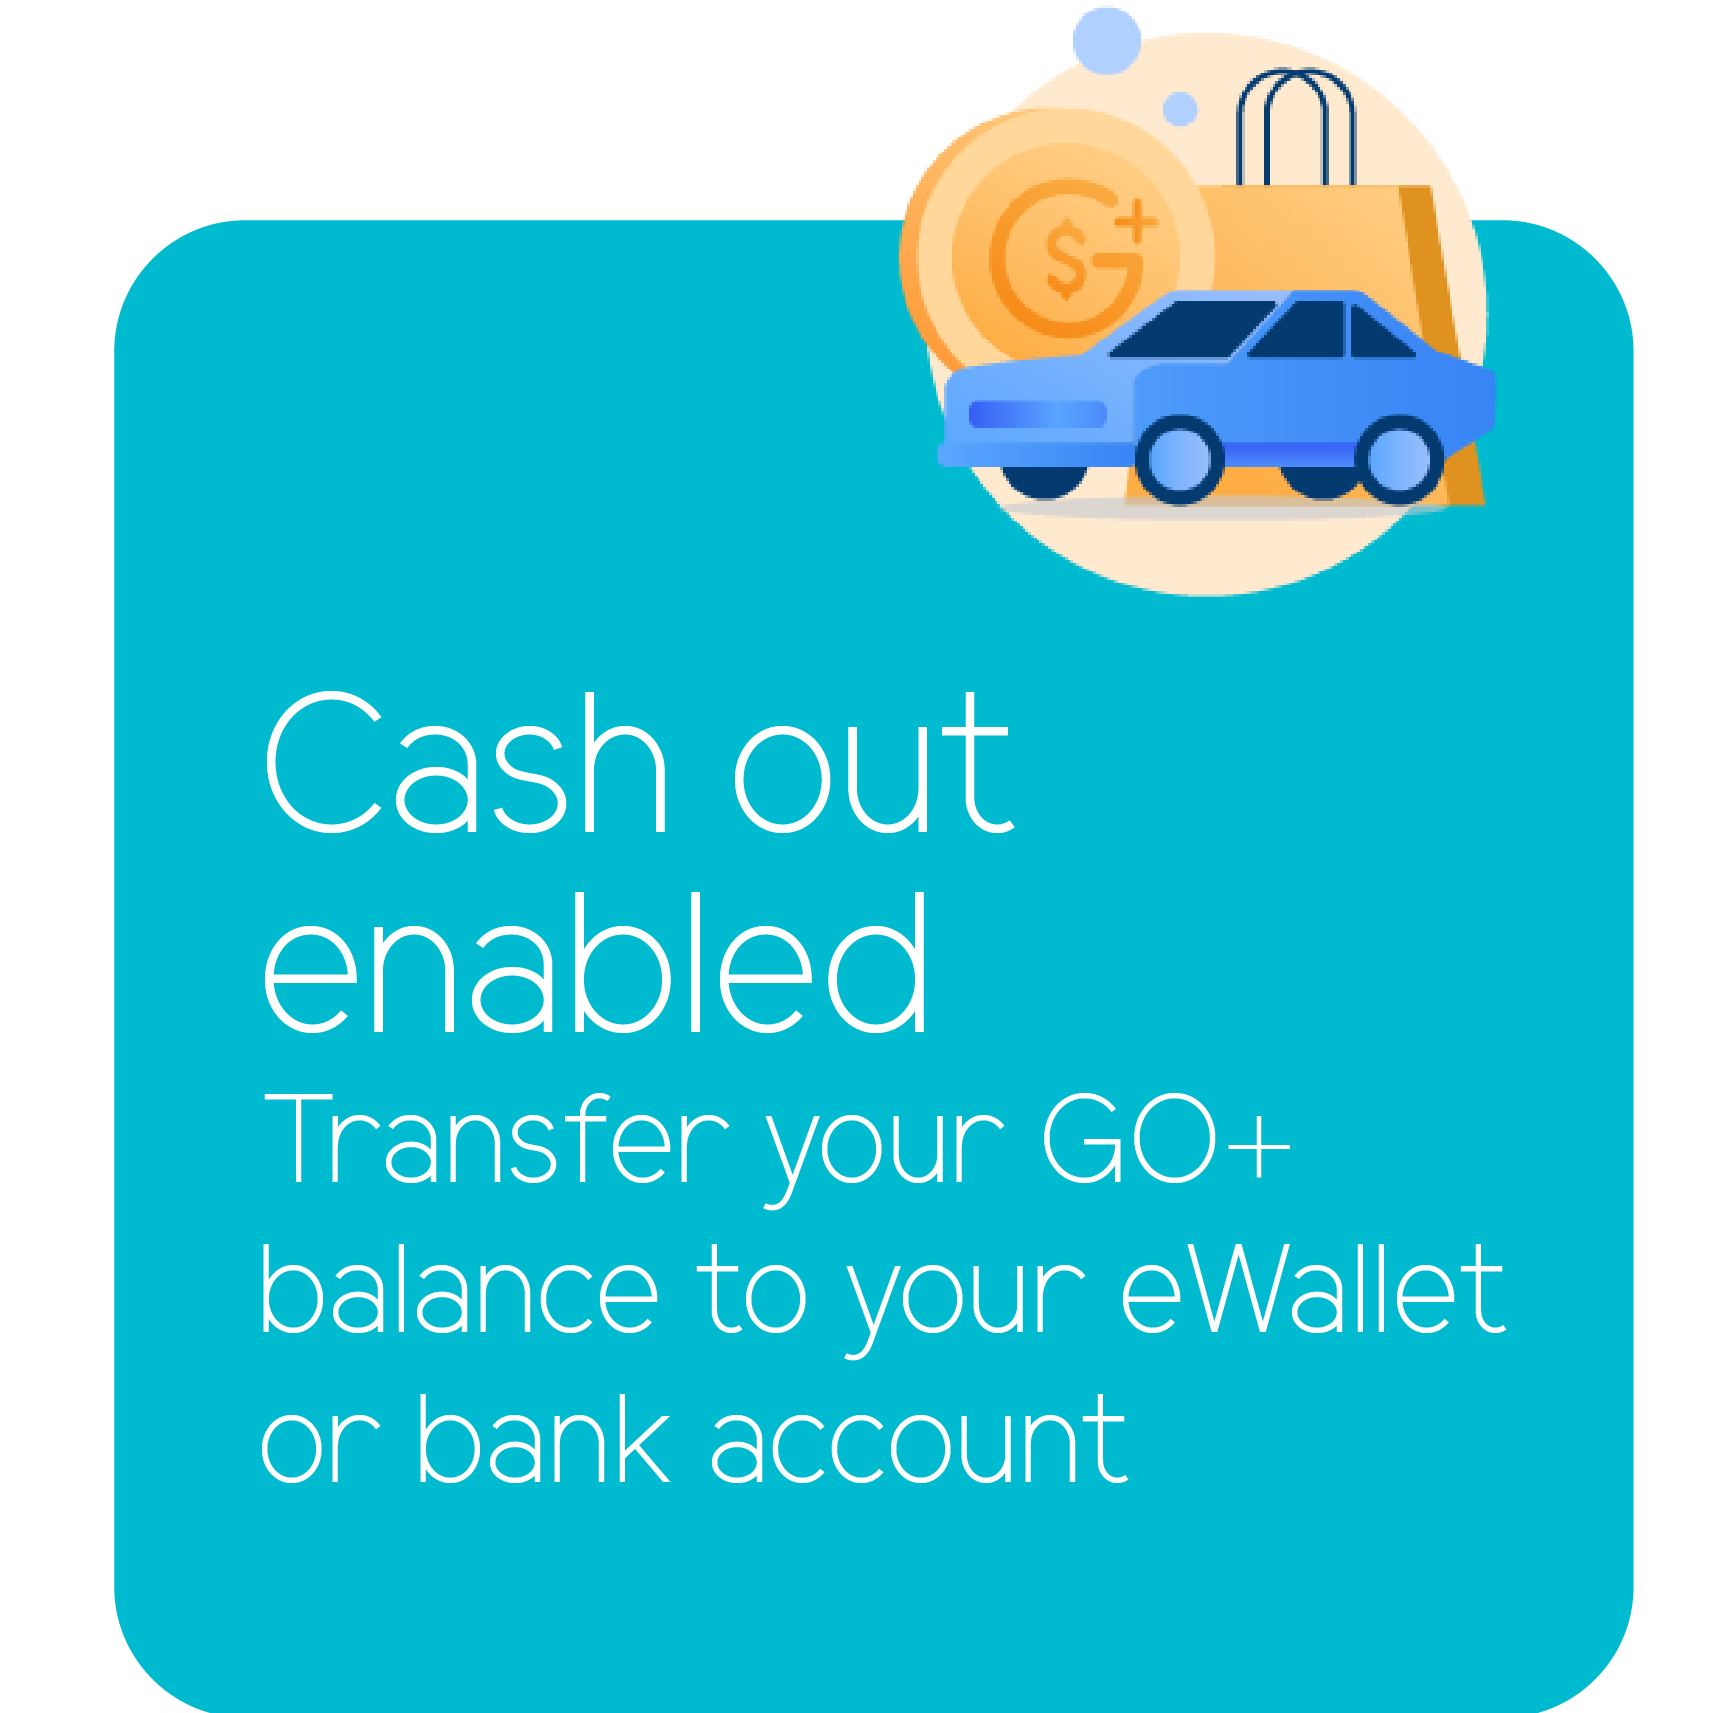 How to cash out tng ewallet